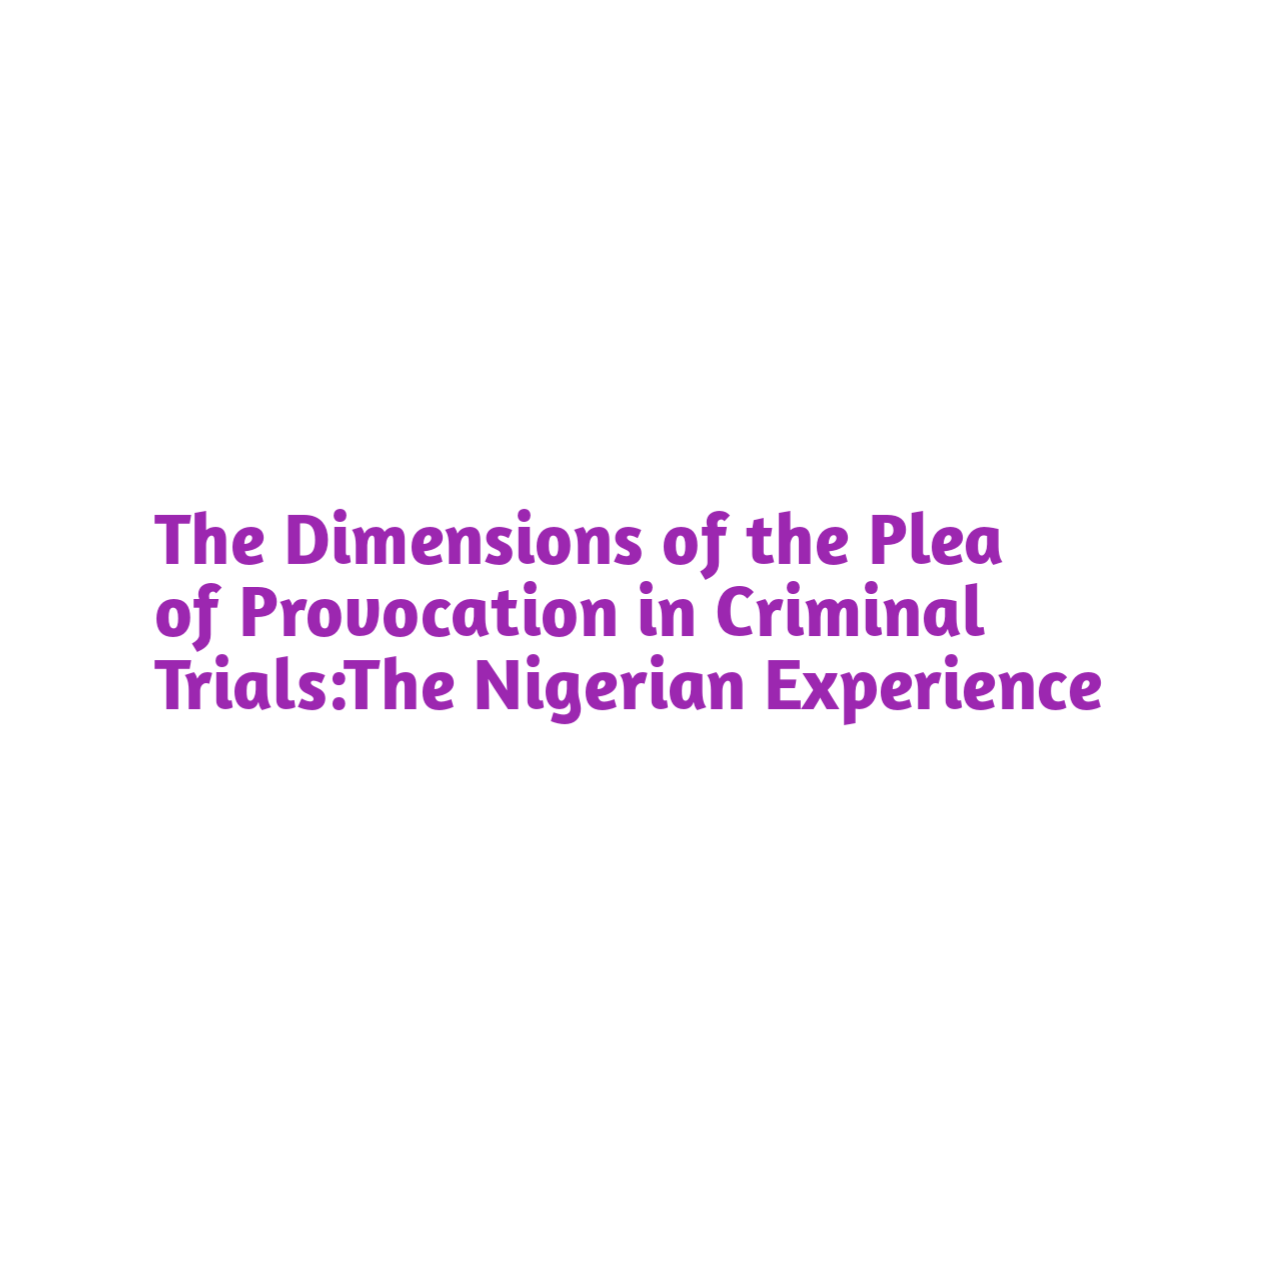 The Dimensions of the Plea of Provocation in Criminal Trials:The Nigerian Experience